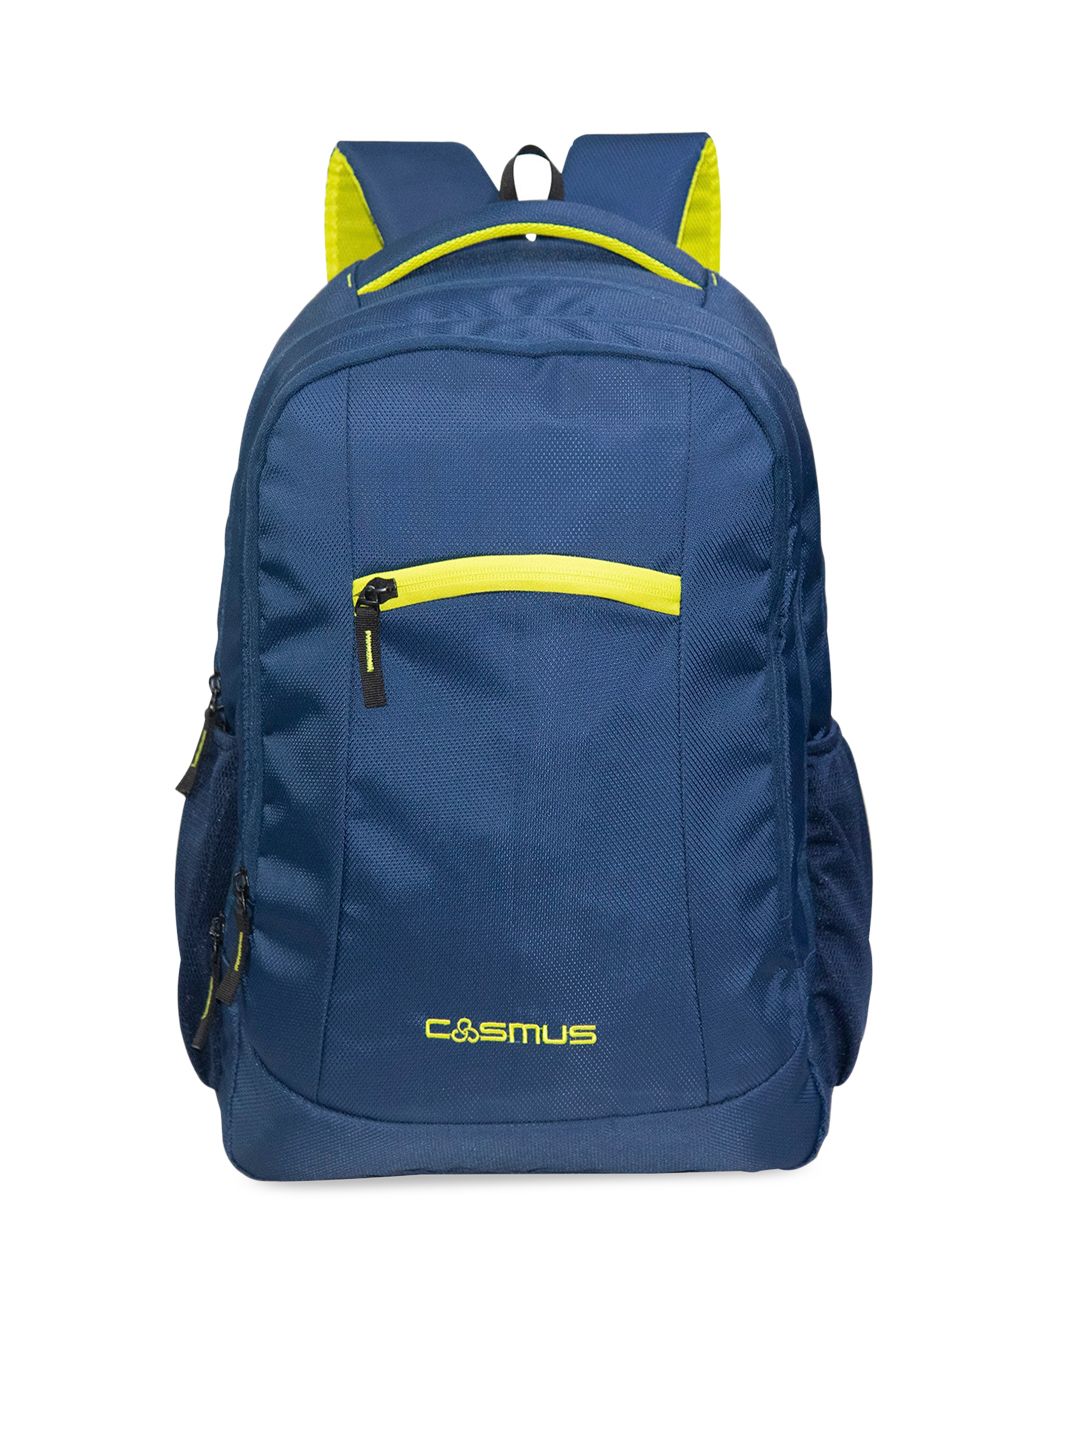 COSMUS Unisex Blue & Yellow Solid Backpack Price in India